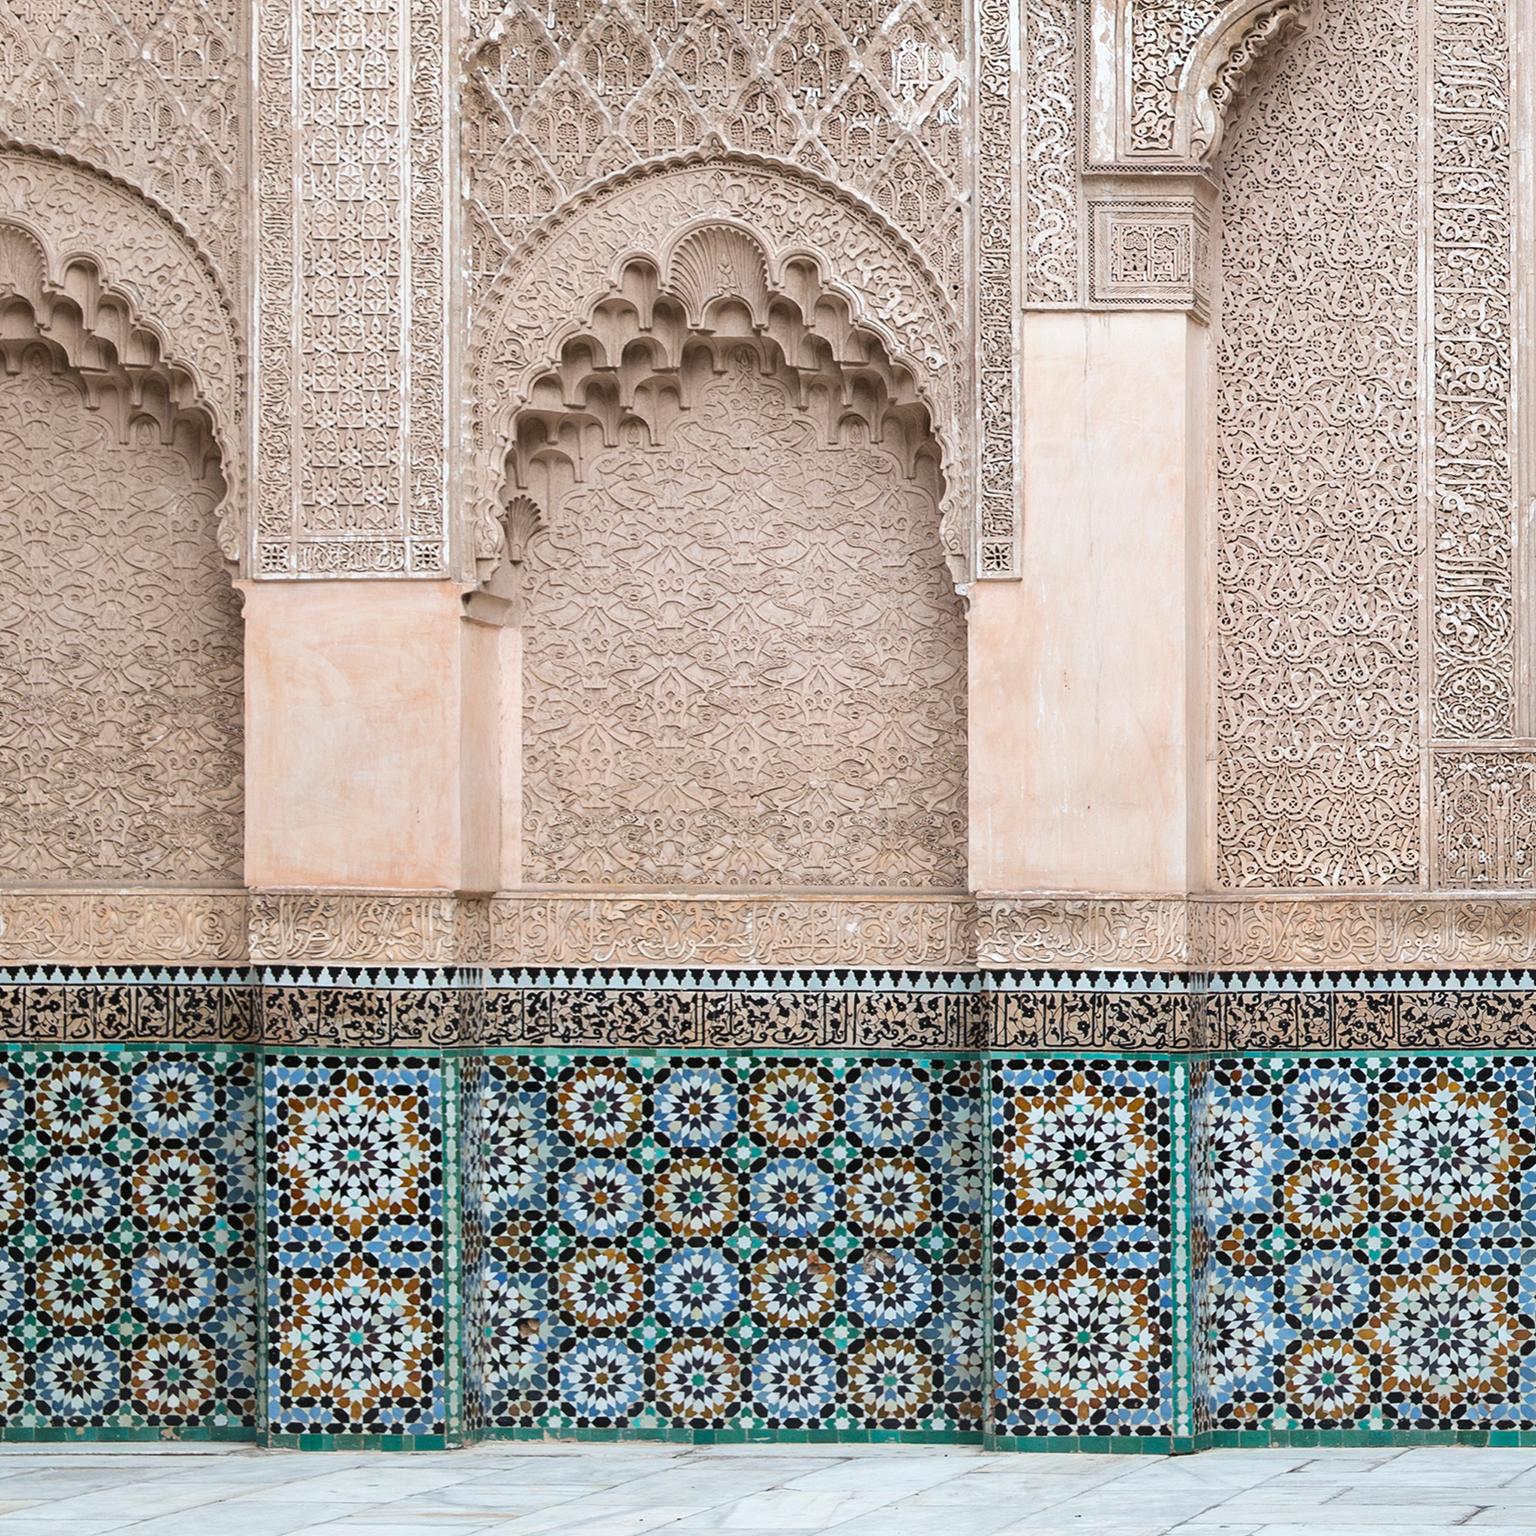 Islamic architectural detail of the Madrasa courtyard, Fez, Morocco, 2016
Photograph by Cosmo Condina. Courtyard of the Madrasa.
Archival pigment print 19 X 12.6 in.  Edition of 10. This is # 3/10 in the edition.

The Ben Youssef Madrasa is one of